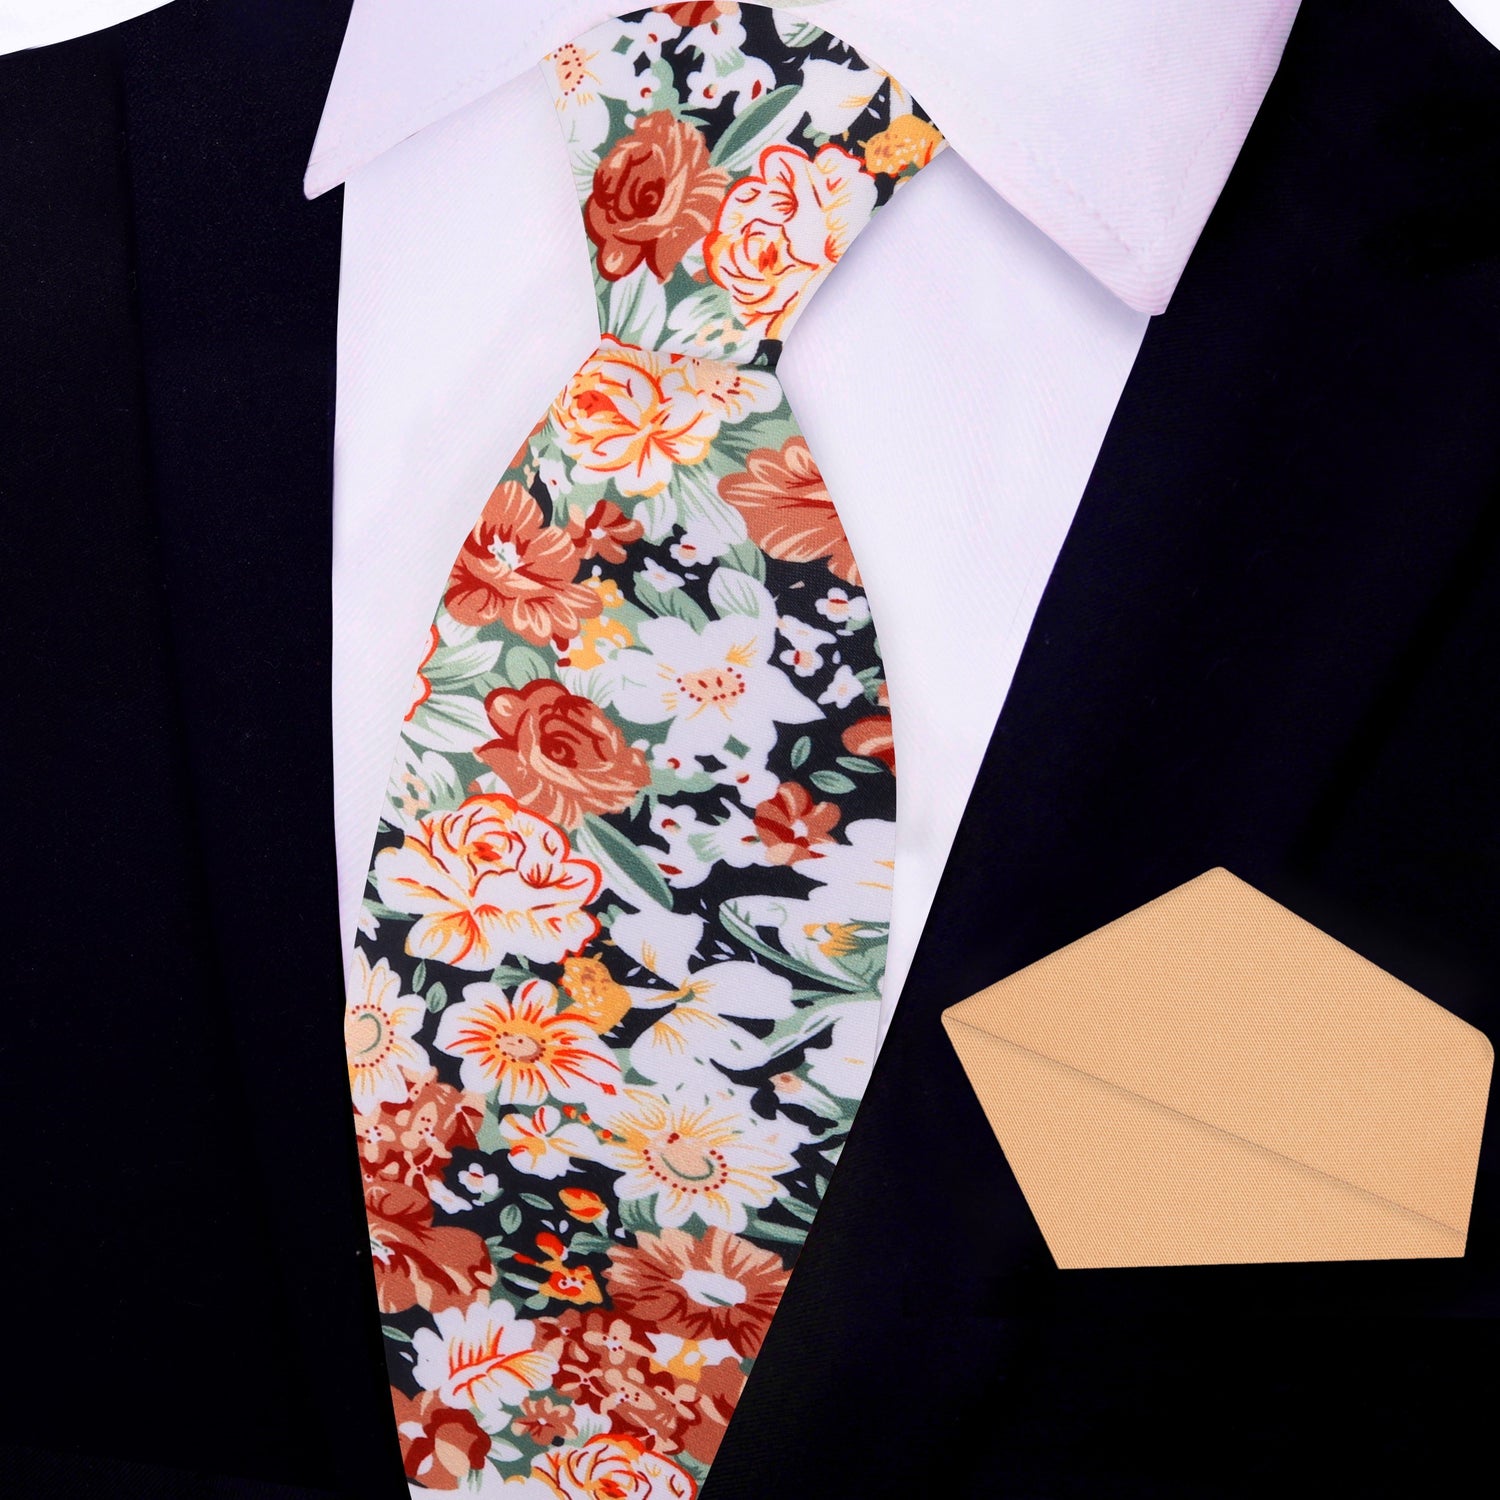 View 2: Brown, Orange, White, Green Sketched Flowers Tie and Light Orange Square